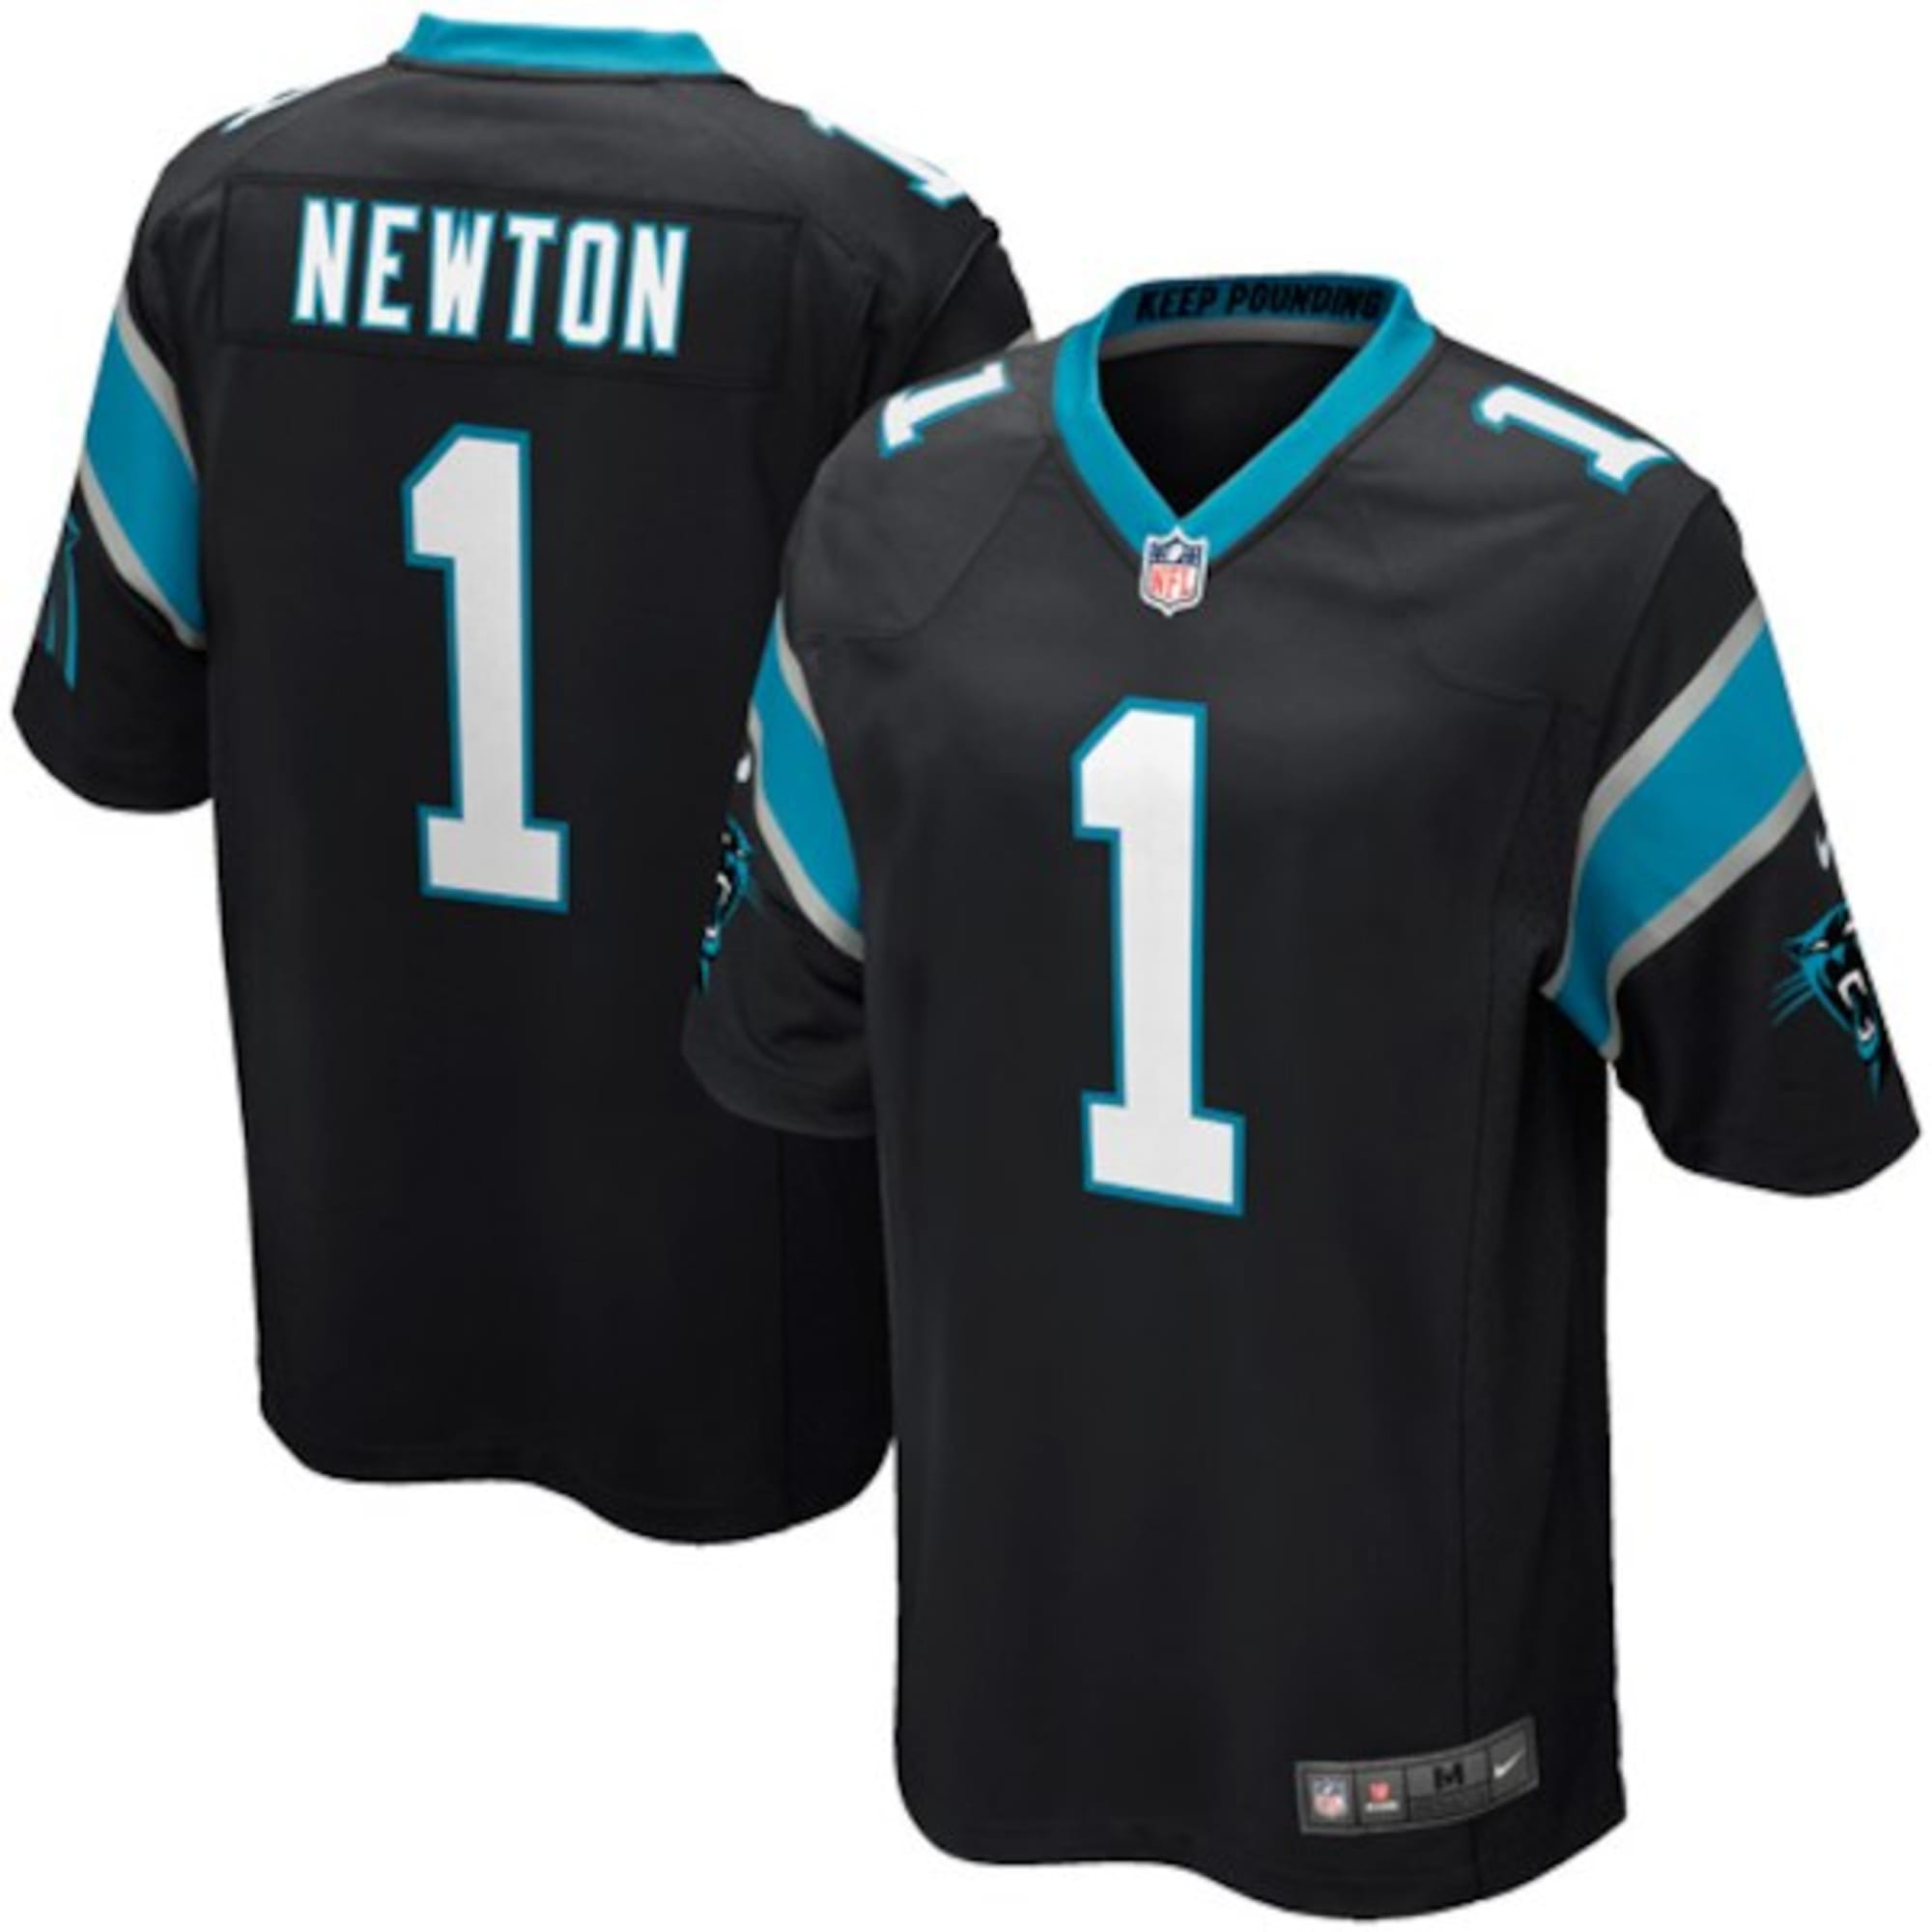 Must-have Carolina Panthers gear for 